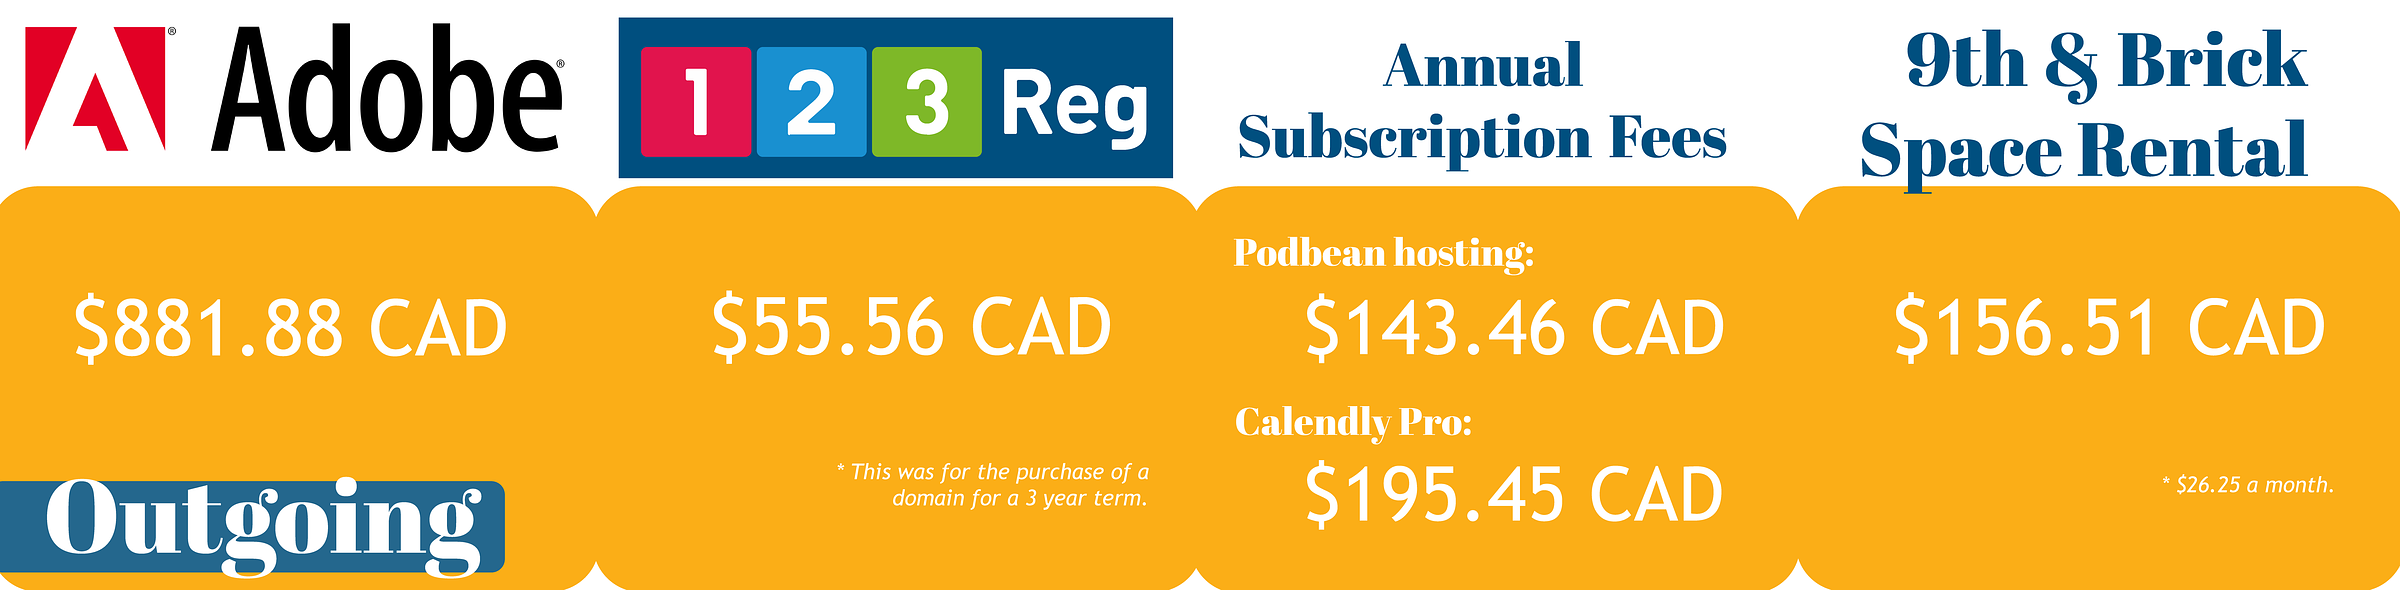 A graphic of outgoing costs to Adobe ($881.88), 123-Reg for a domain ($55.56), Podbean hosting ($143.46), Calendly pro annual subscription ($195.45), and rent at 9th & Brick ($156.51)